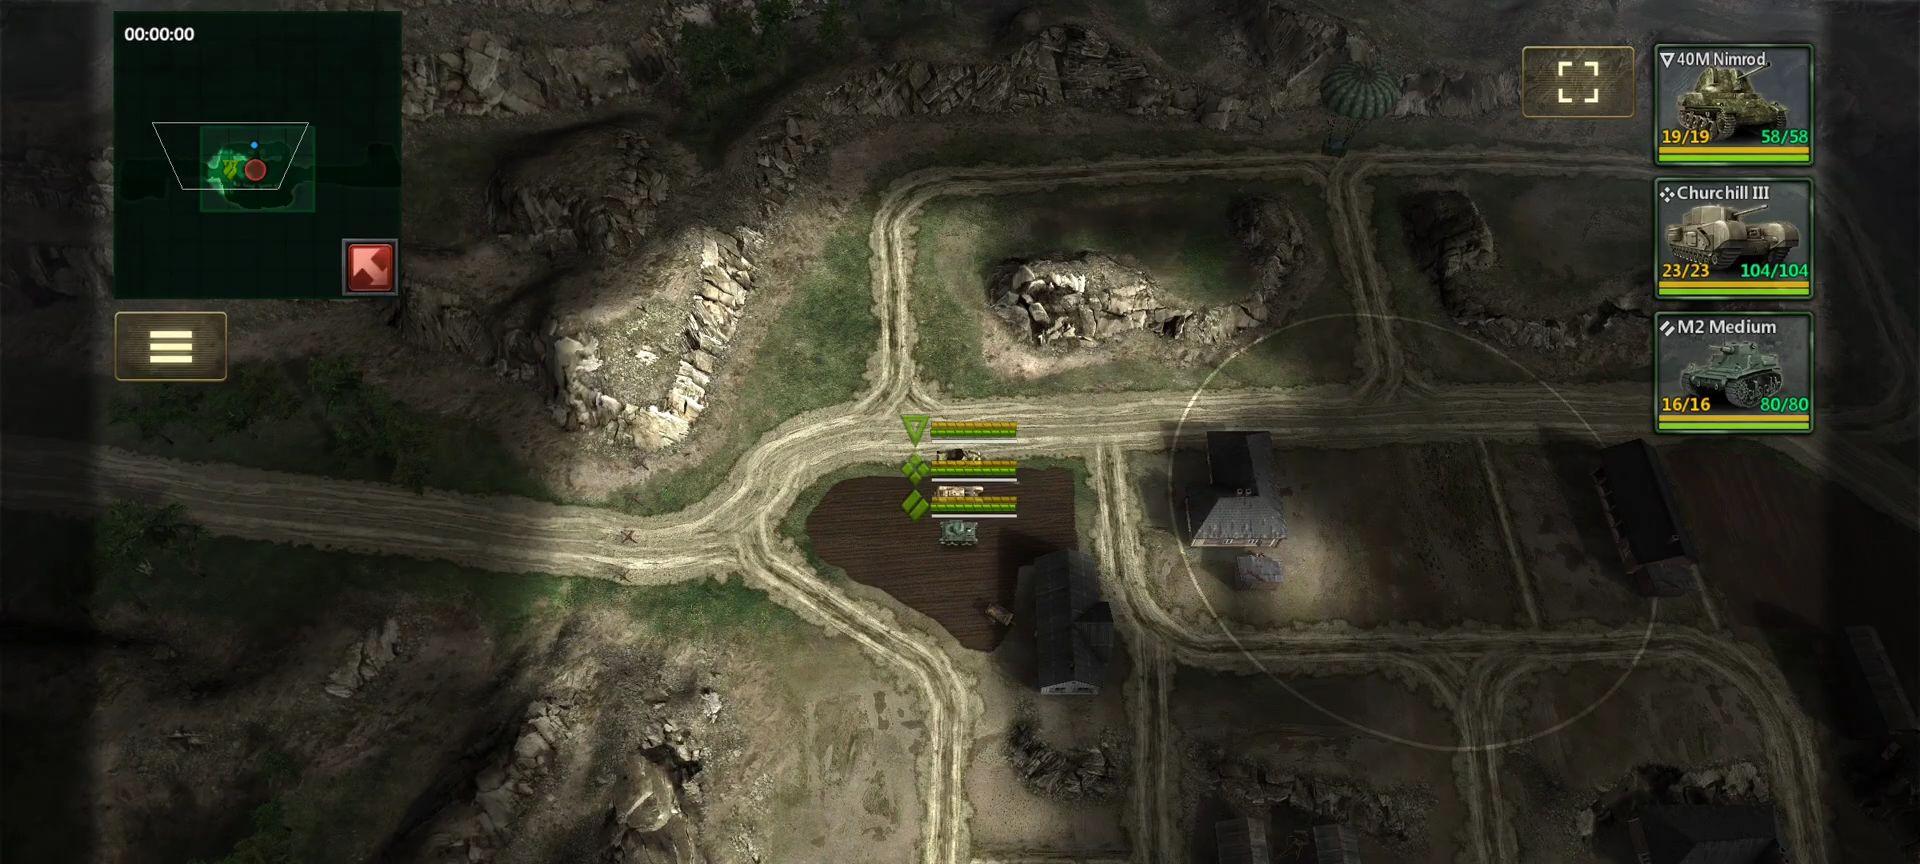 Scarica Tanks Charge: Online PvP Arena gratis per Android.